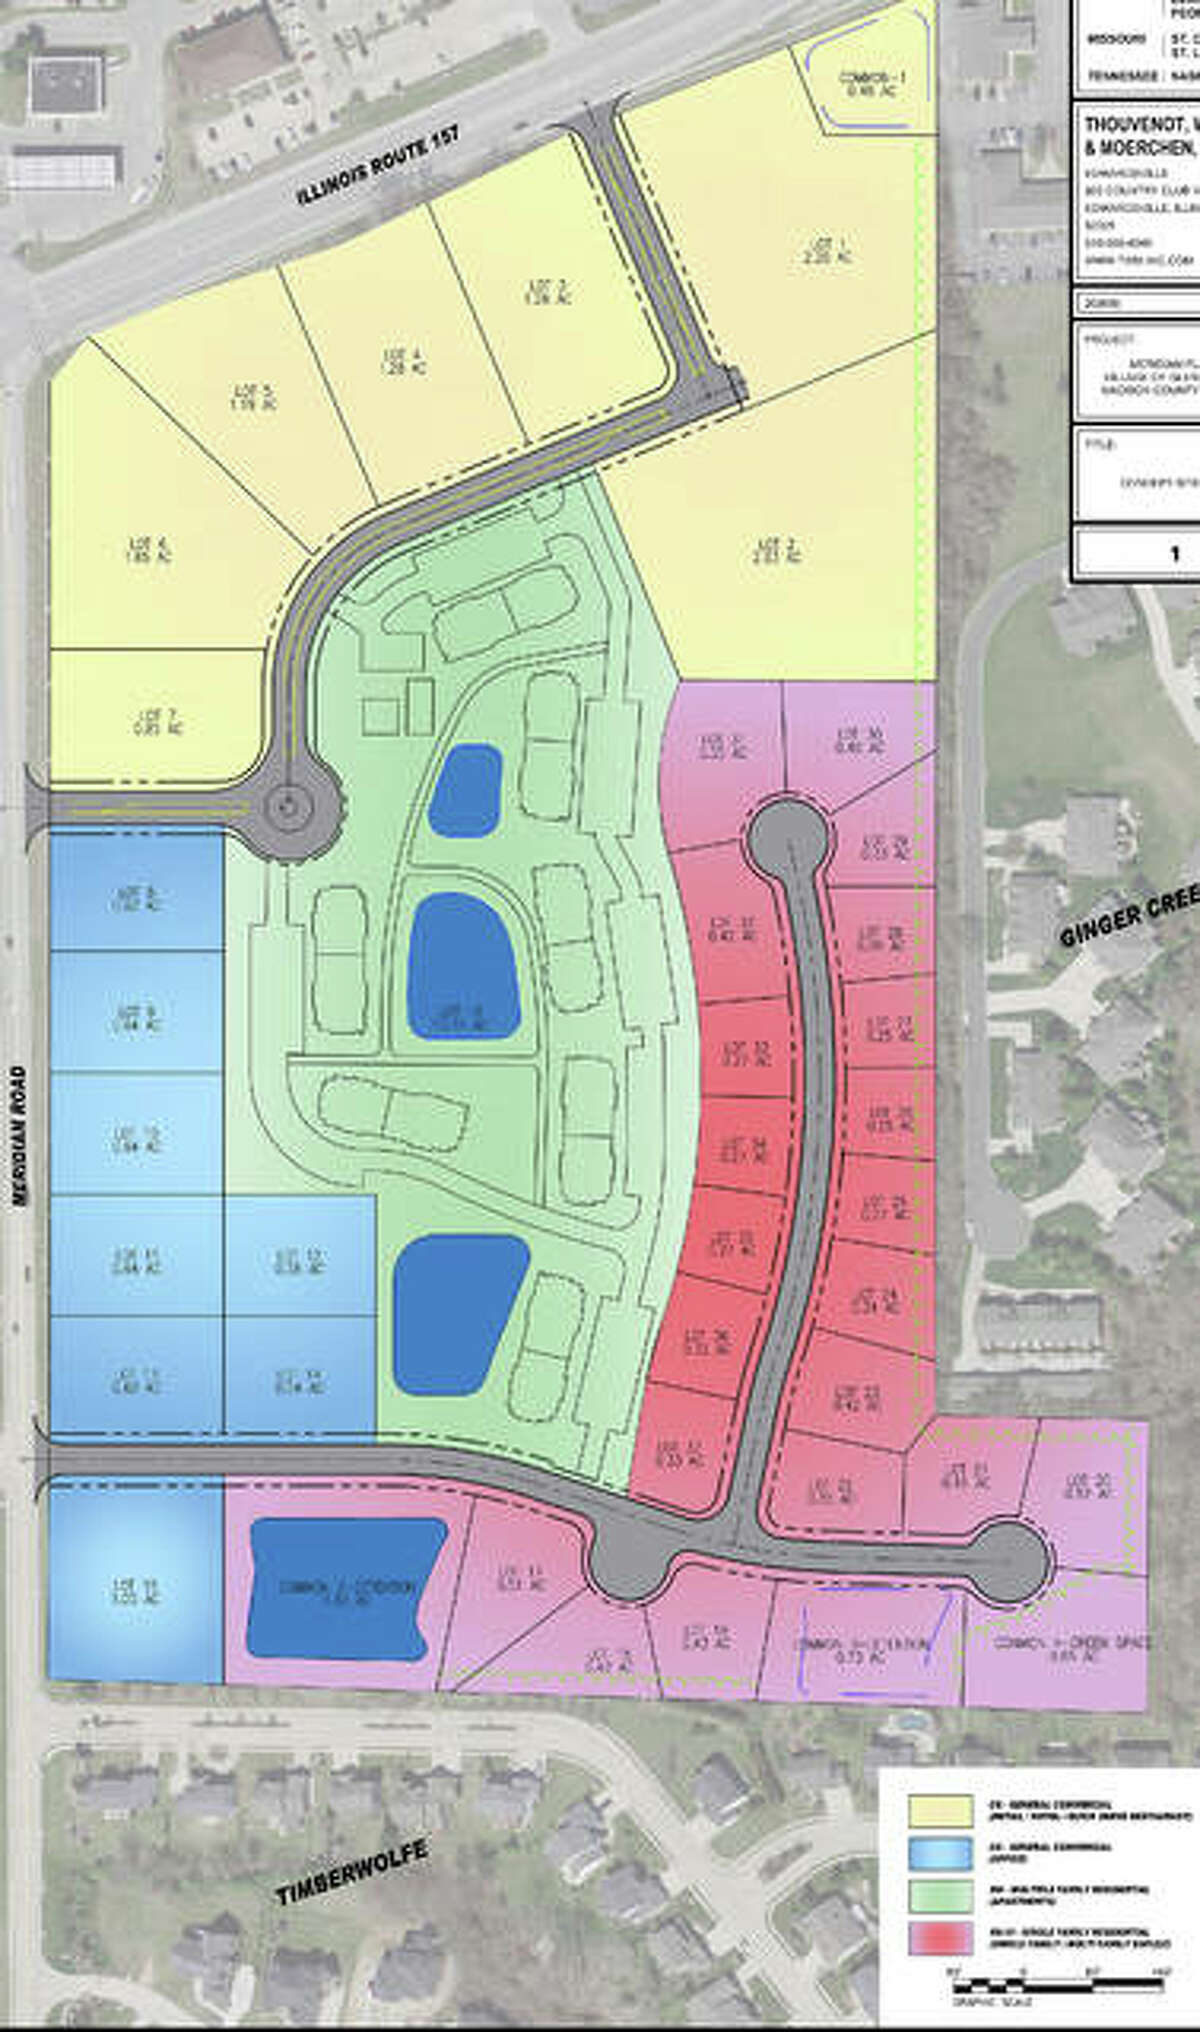 The color-coding on this Meridian Plaza conceptual aerial layout identifies the following: gold - commercial/retail; blue - professional/medial office space; green - multi-family residential; and red - single-family and/or double-family residential.